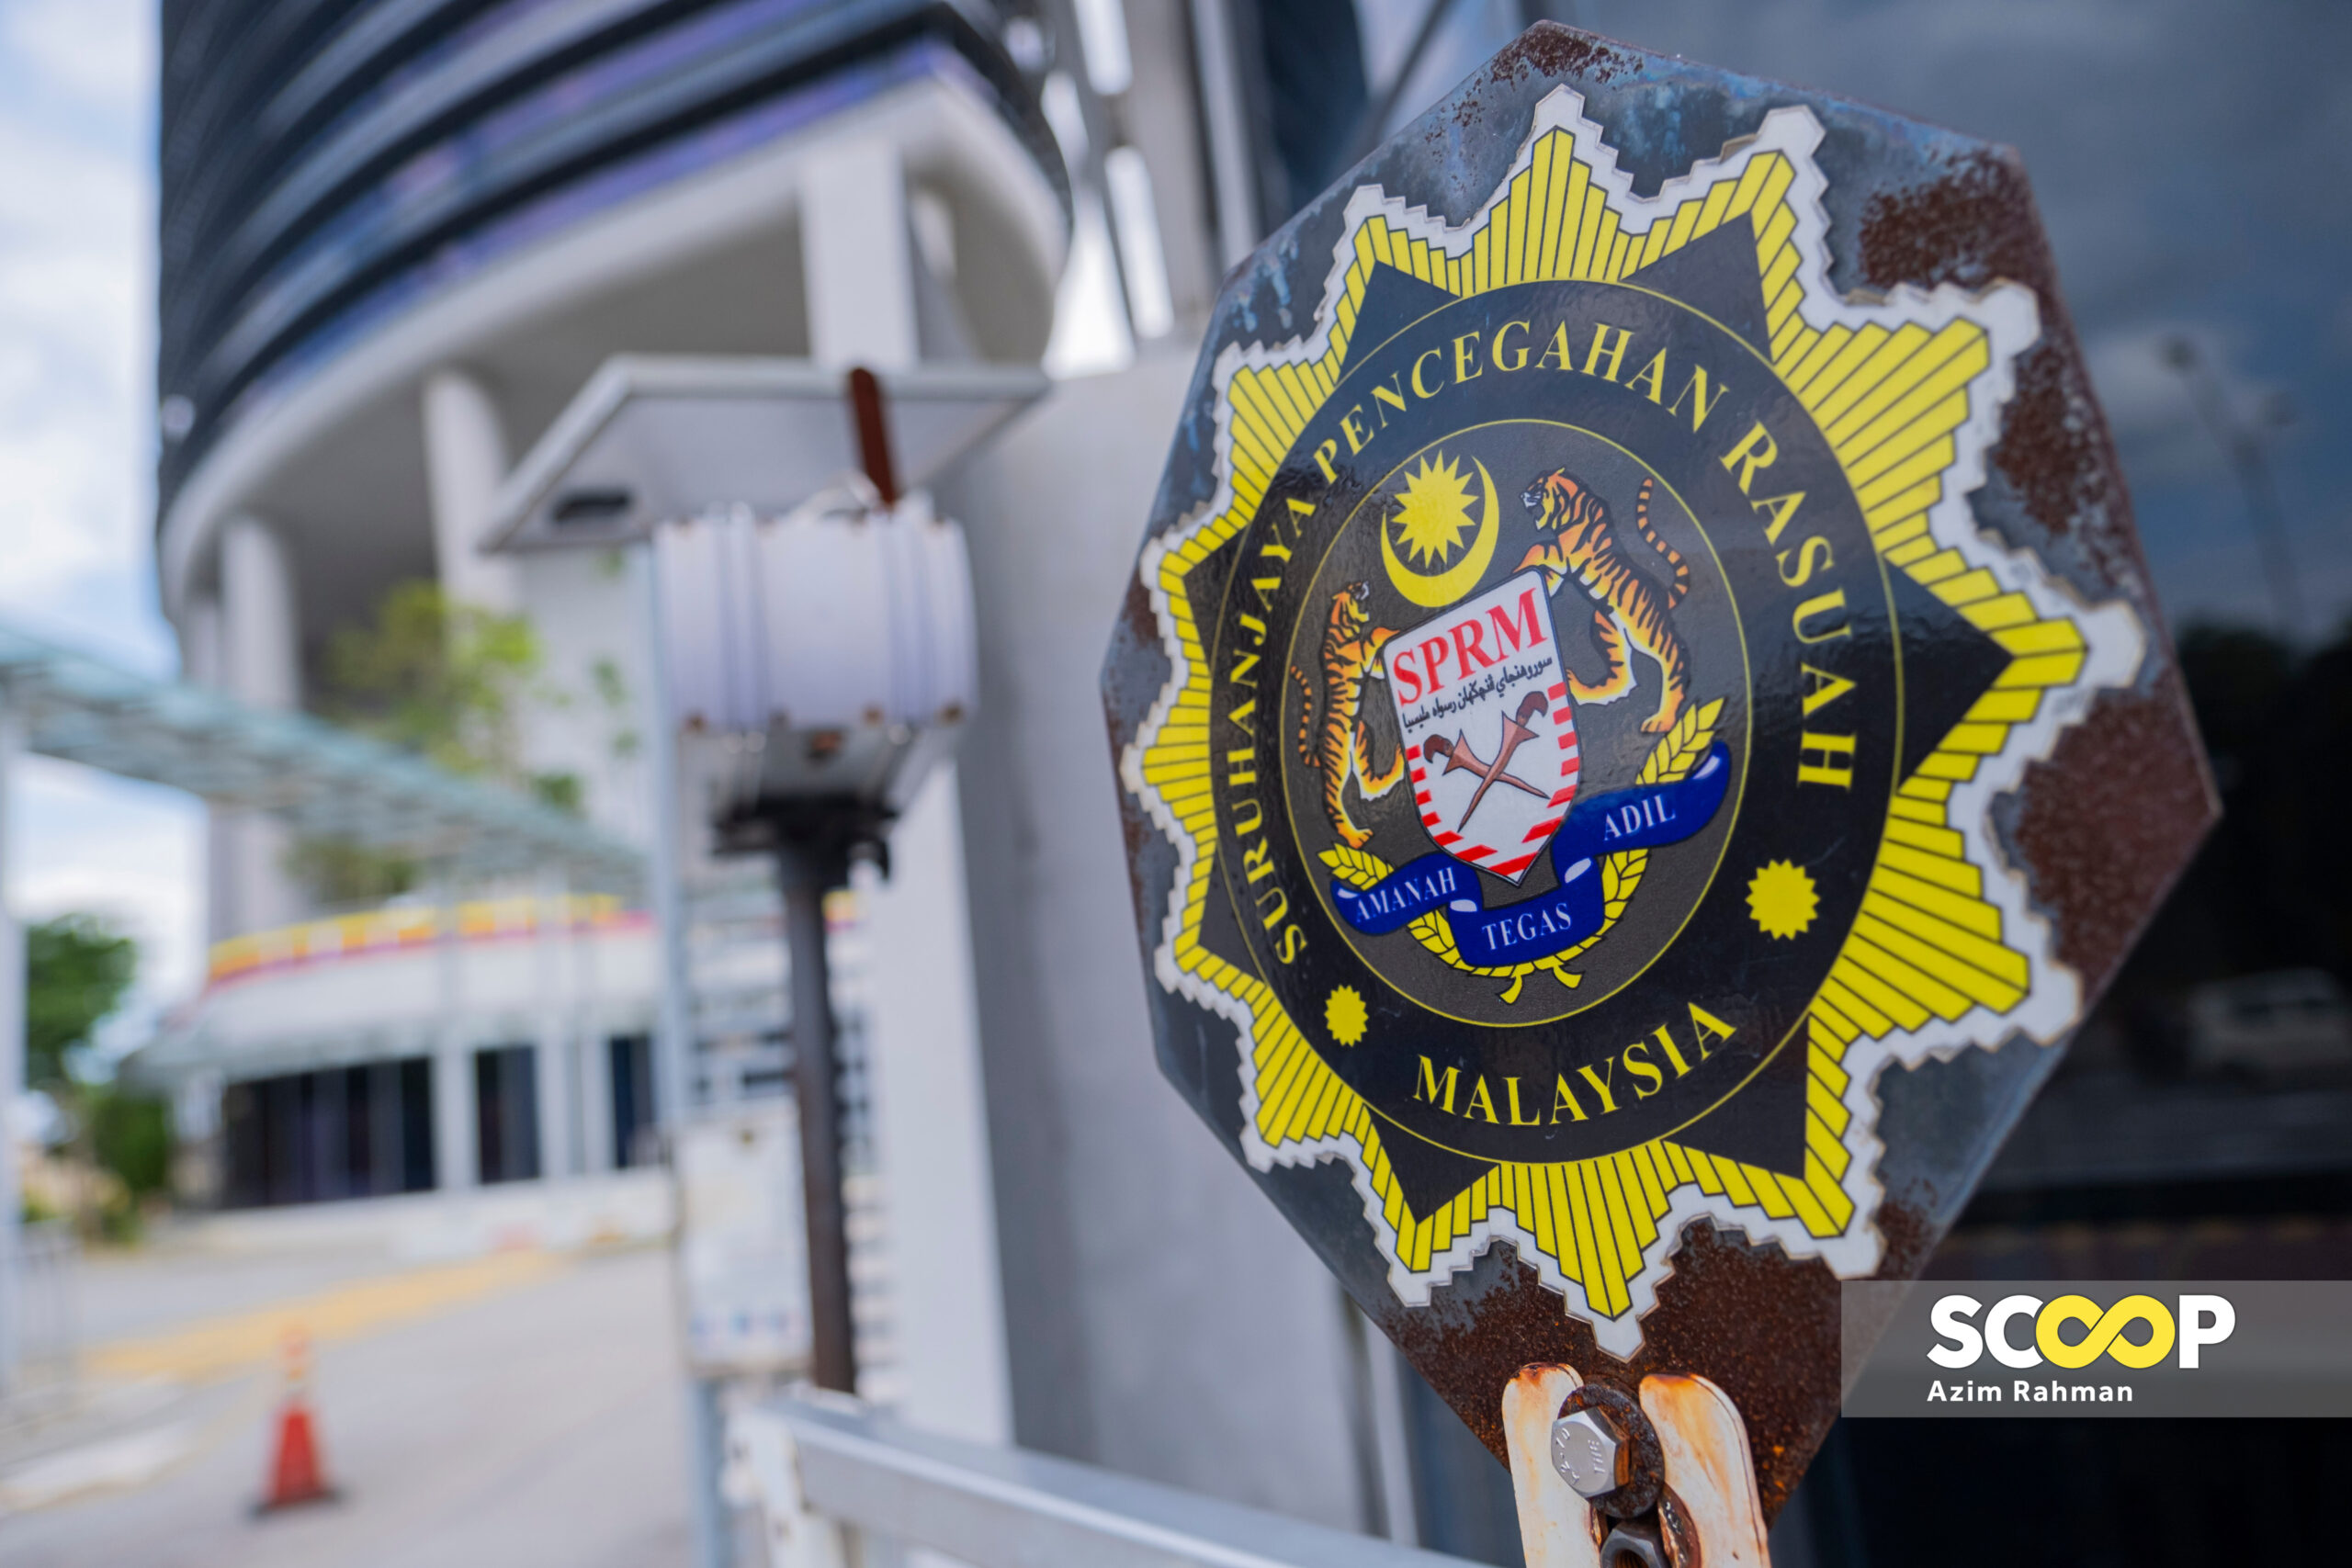 Three law enforcers nabbed for taking bribes, protecting massage parlour operations: MACC